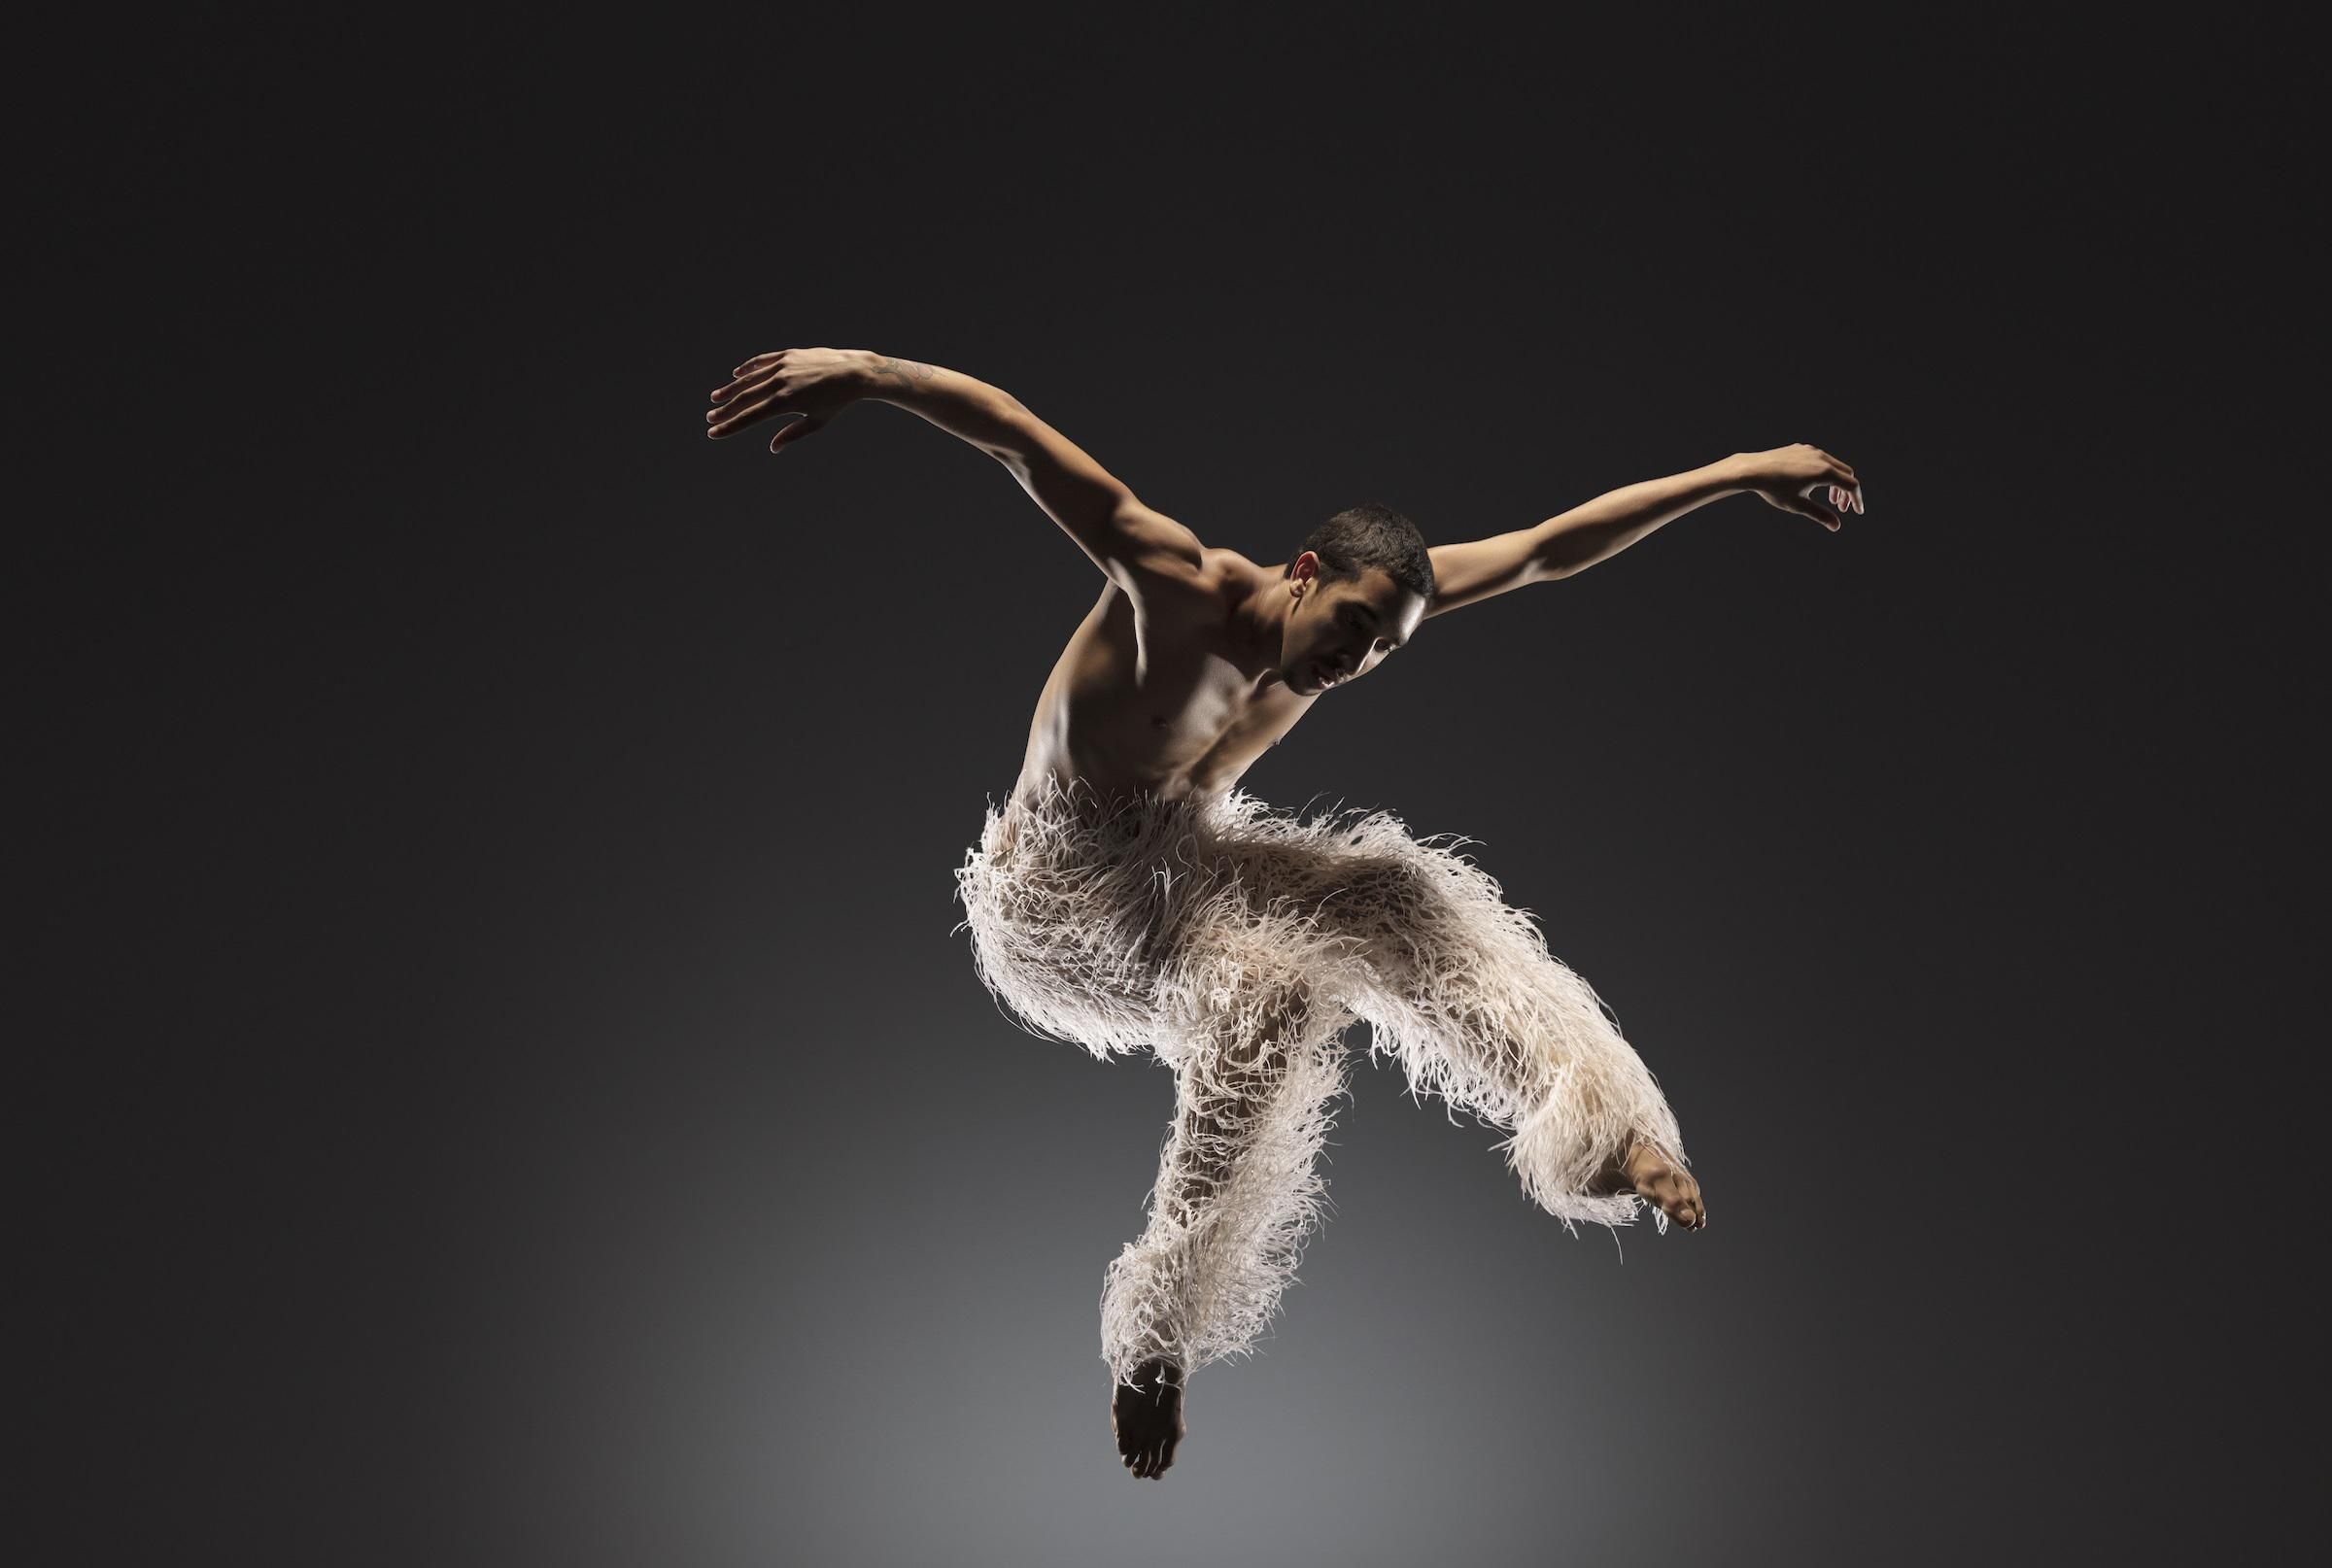 Homecoming Dance: Lines Ballet Returns to YBCA for Just Two Nights